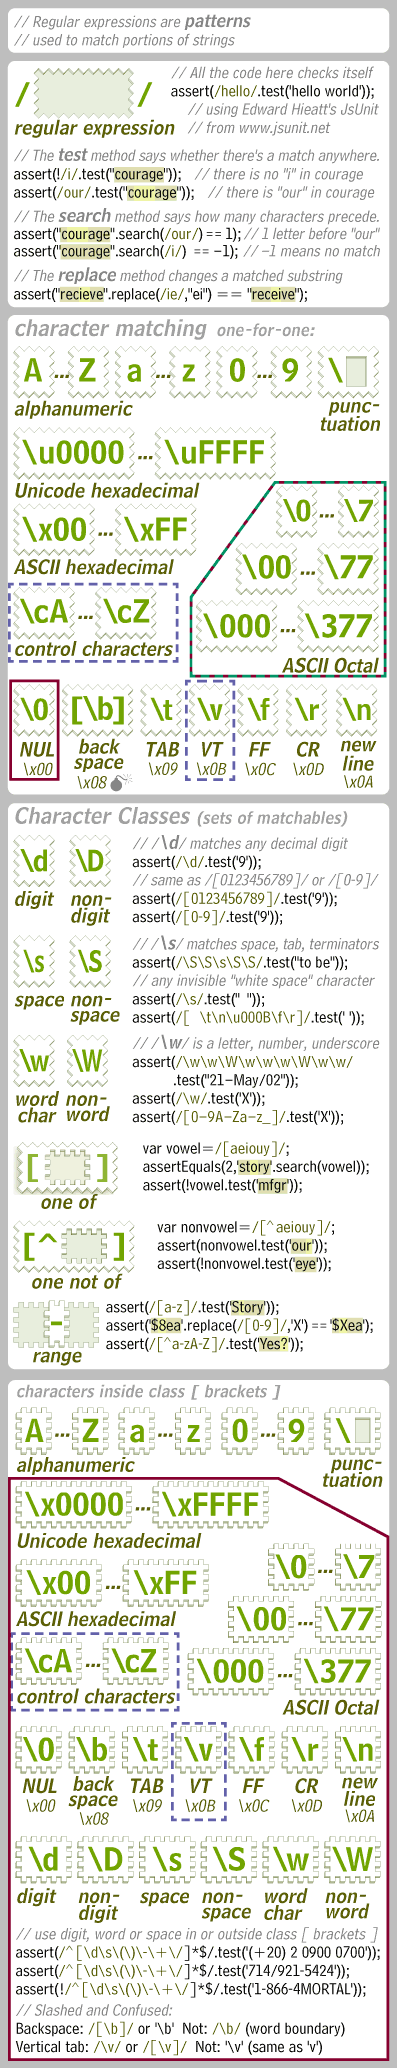 Regular Expressions (column 1 from a page of the JavaScript Card)